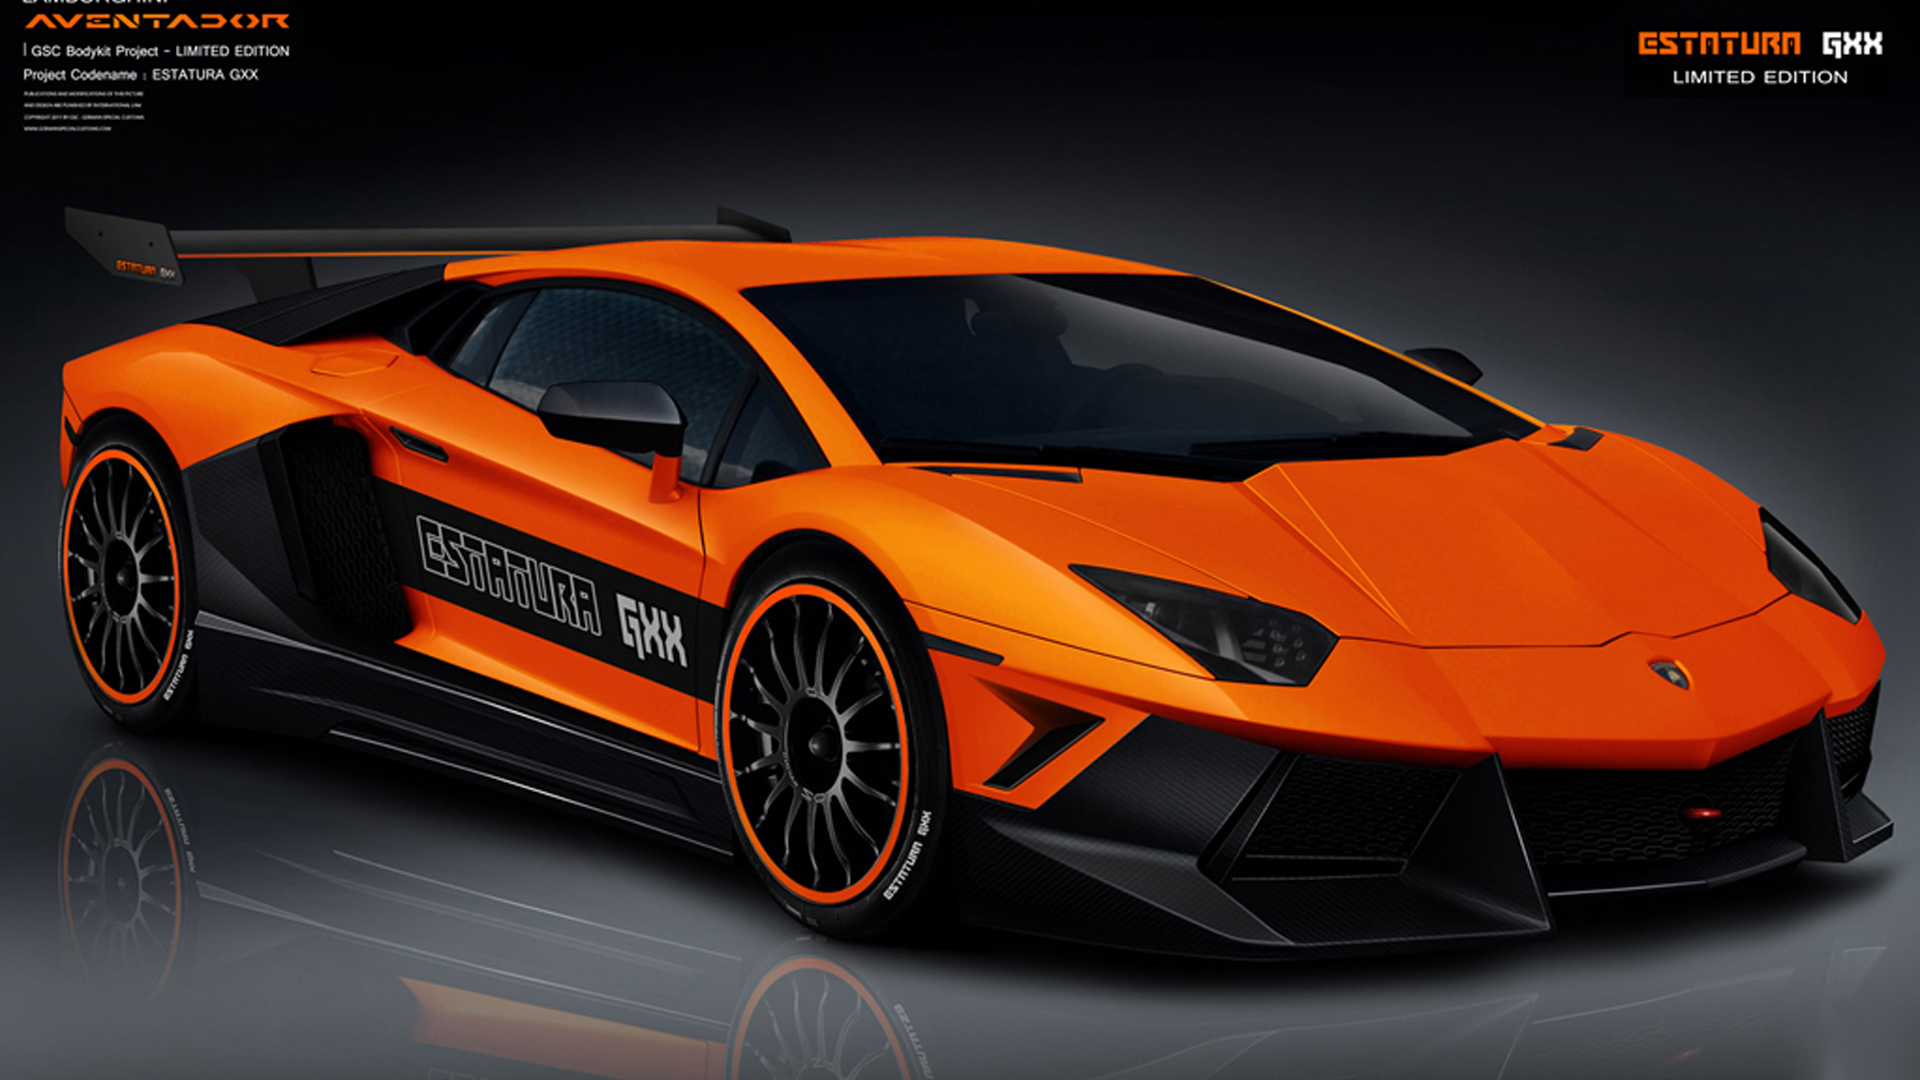 Lamborghini Aventador Wallpapers HD A24 Orange - lamborghini aventador desktop sports cars, race cars, luxury cars, expensive cars, wallpapers pictures images free download